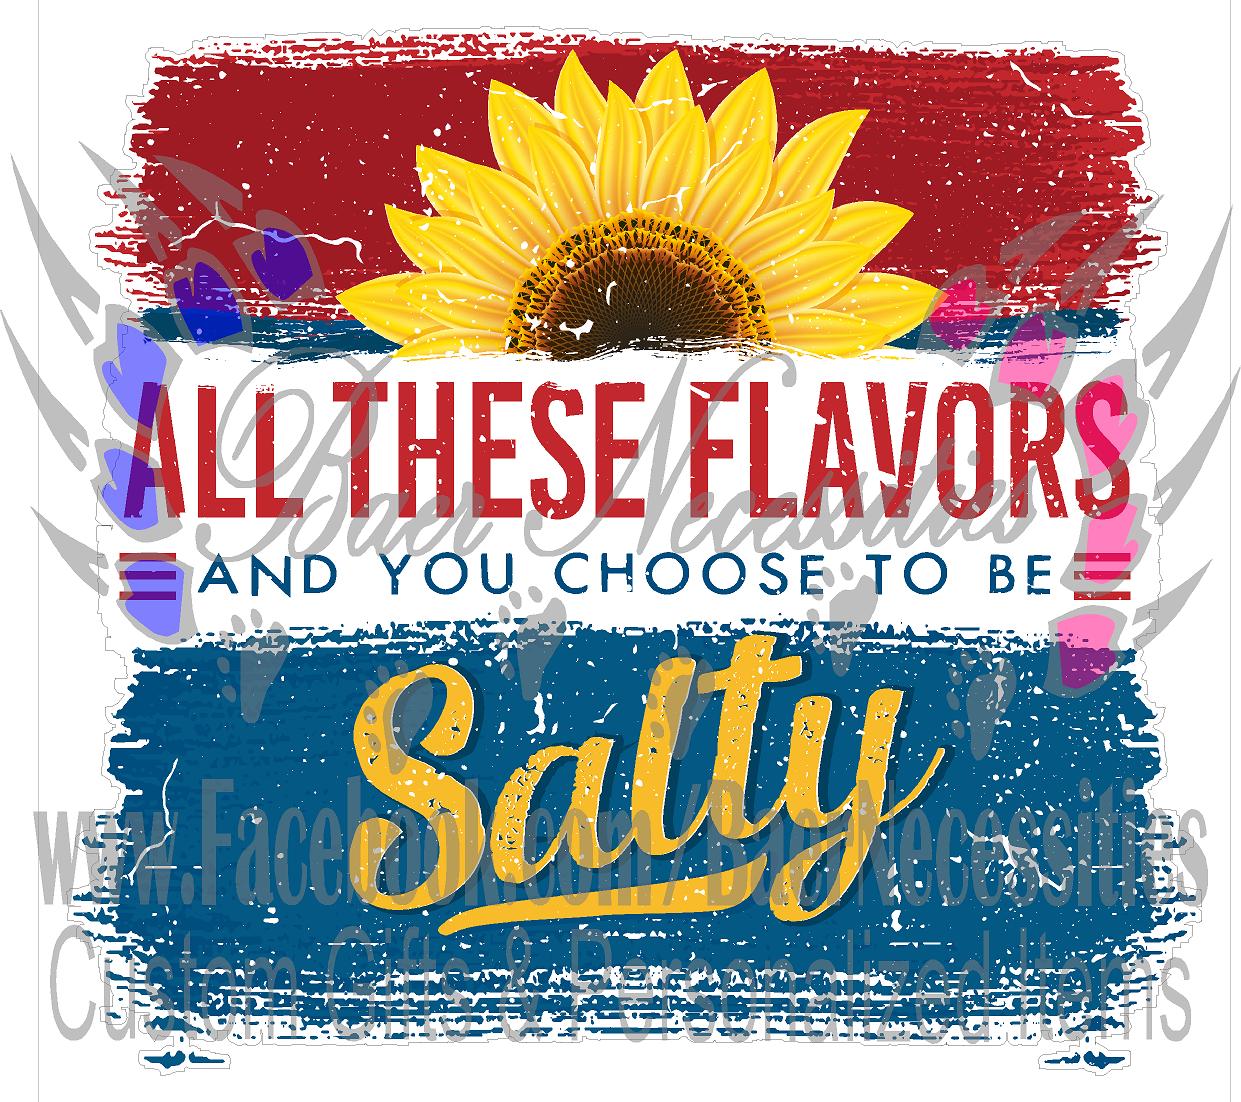 All these flavors and you choose to be Salty - Transfer